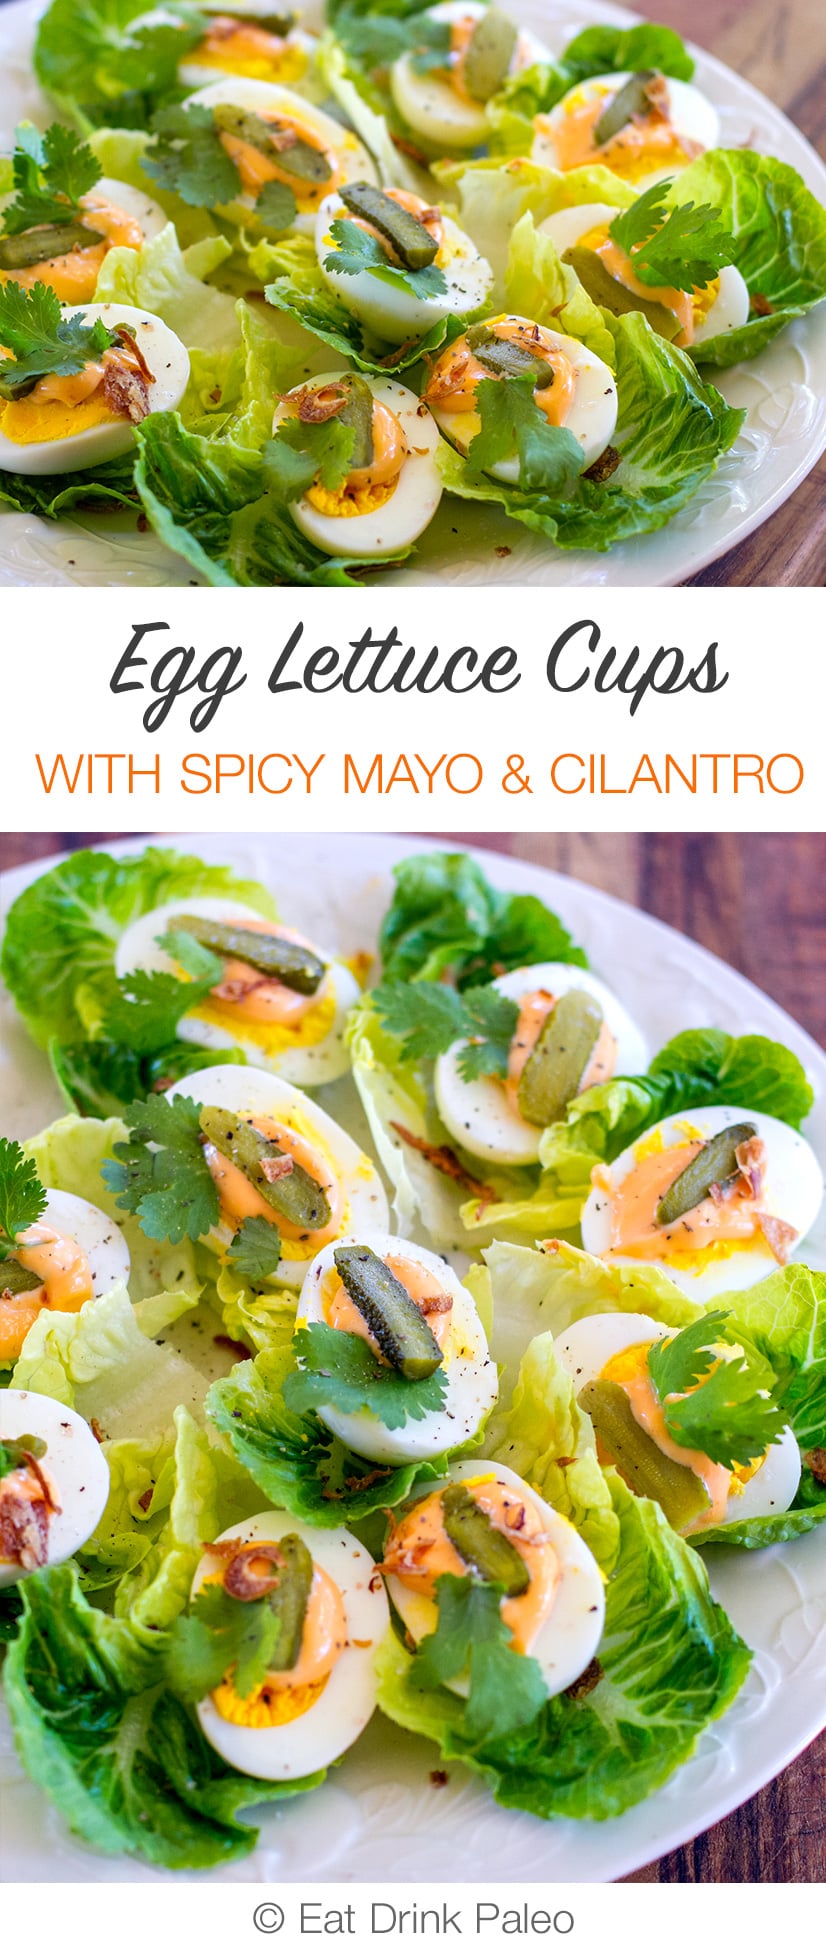 Egg & Lettuce Cups With Spicy Mayo (Paleo, Keto, Whole30)